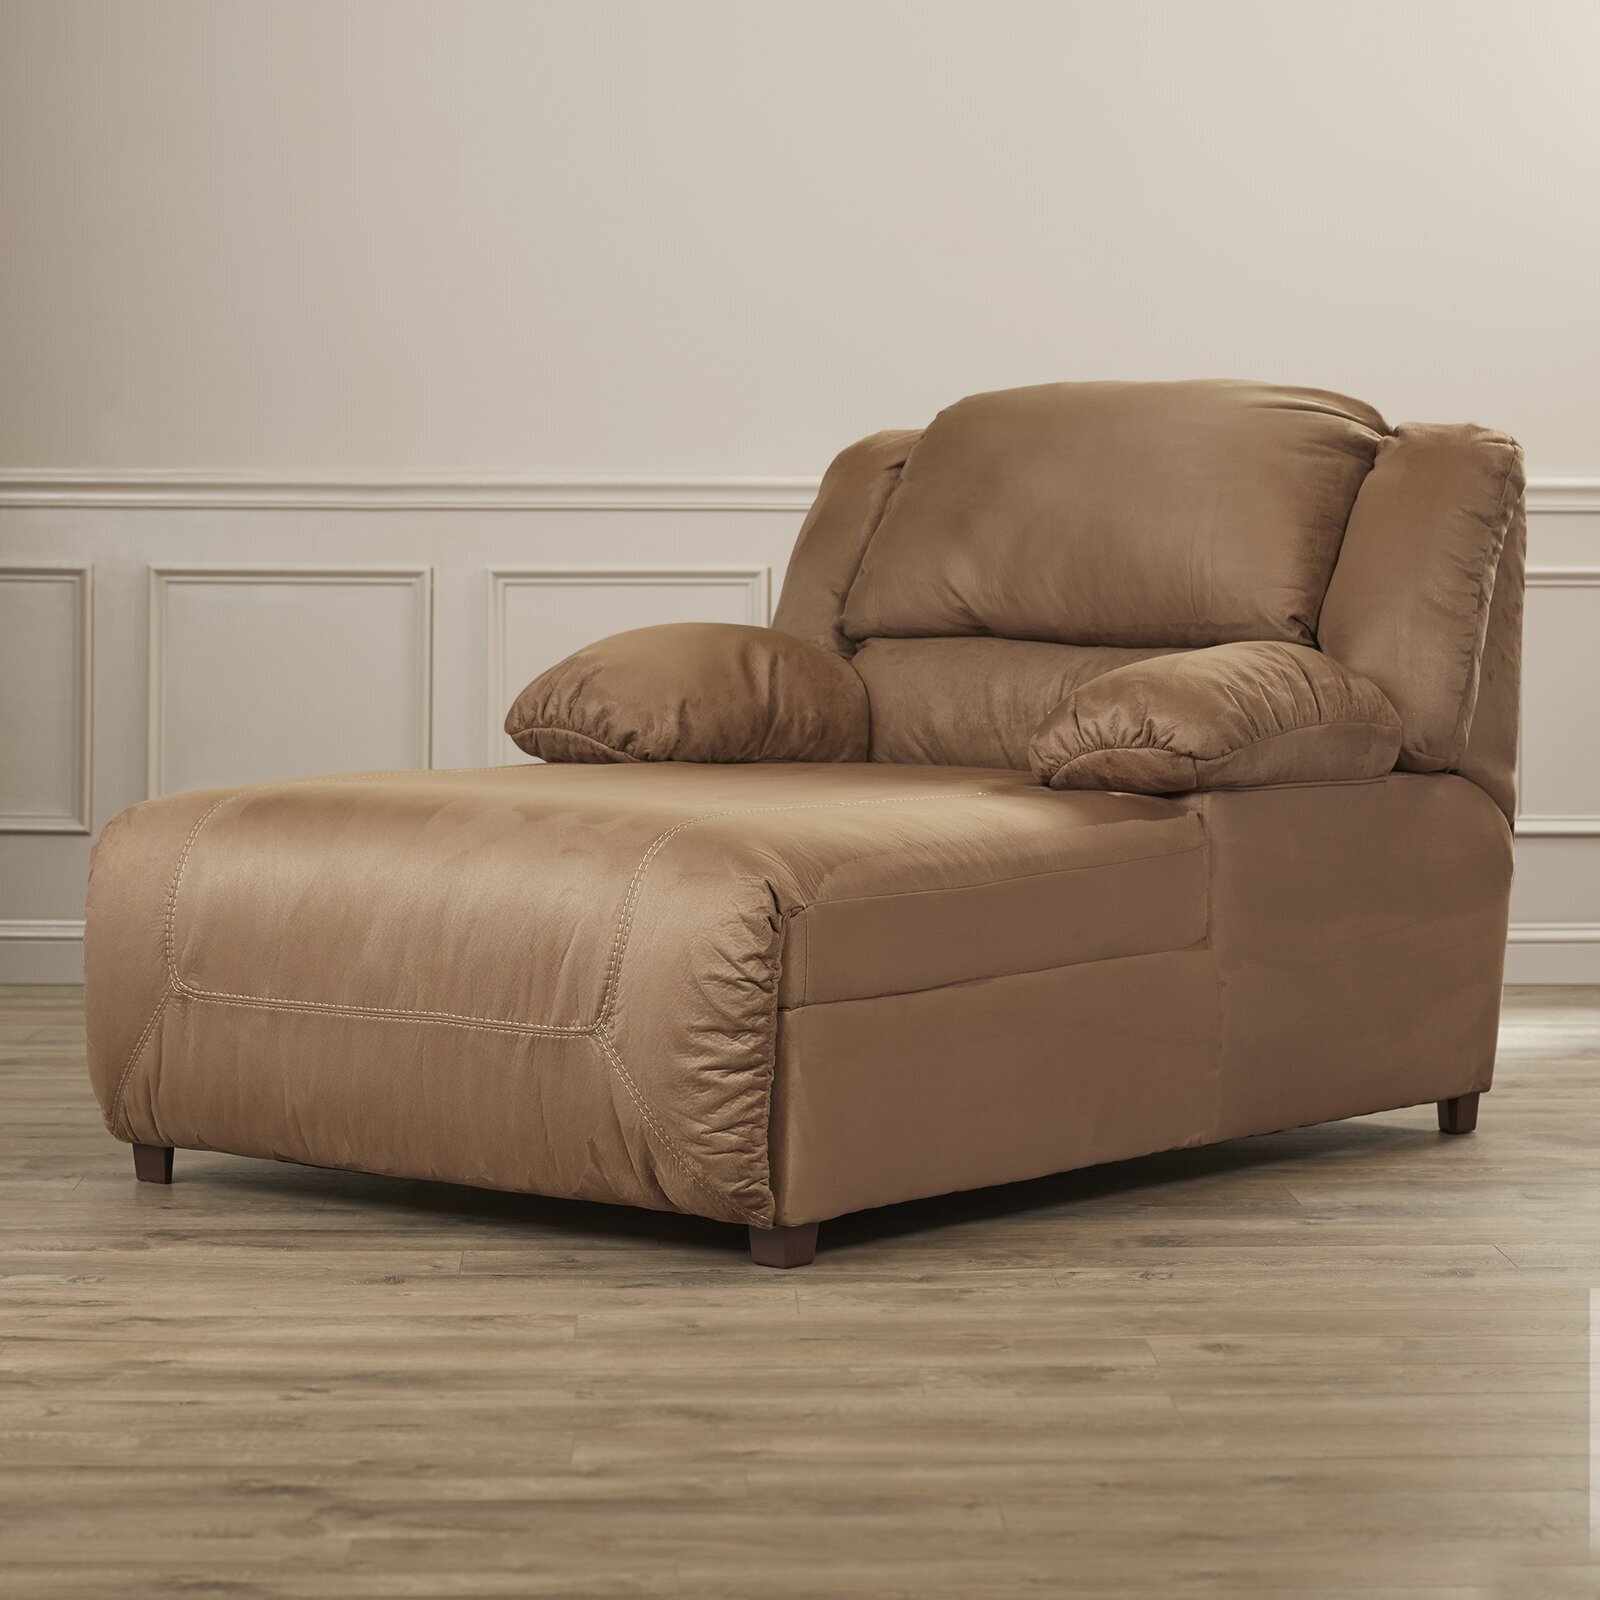 Microfiber Wide Chaise Lounge Chair